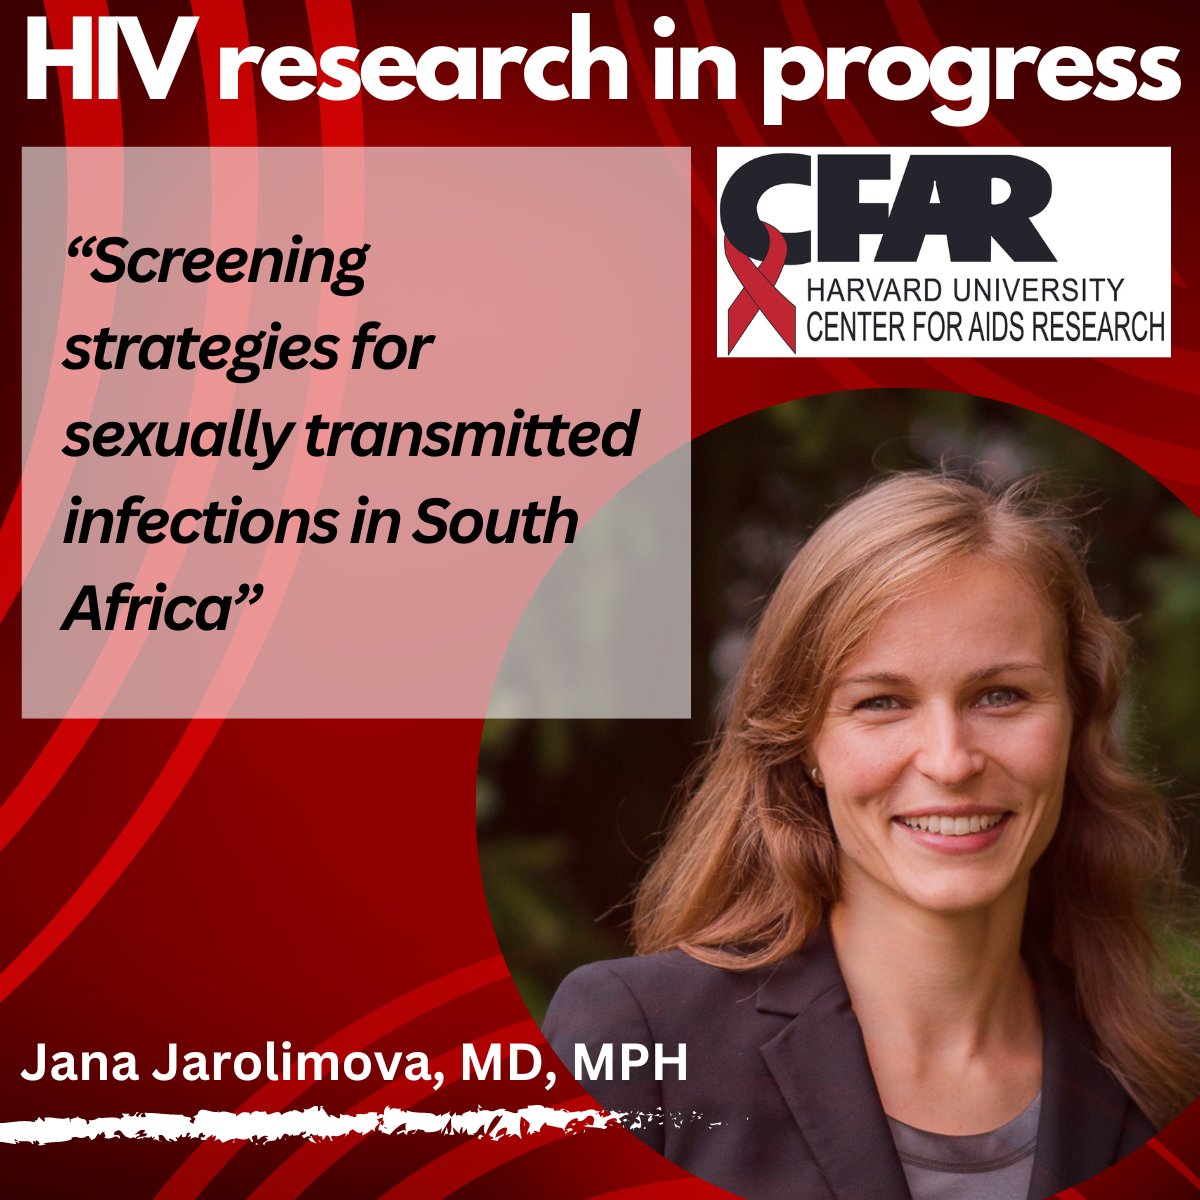 This Friday, April 26 (8am ET) Jana Jarolimova @jjarolimova presents her #HIV Research in Progress “Screening strategies for sexually transmitted infections in South Africa” @mgh_id @mghmedres @harvardmed @bwh_id @mgh_mpec INFO @ conta.cc/3UboabP